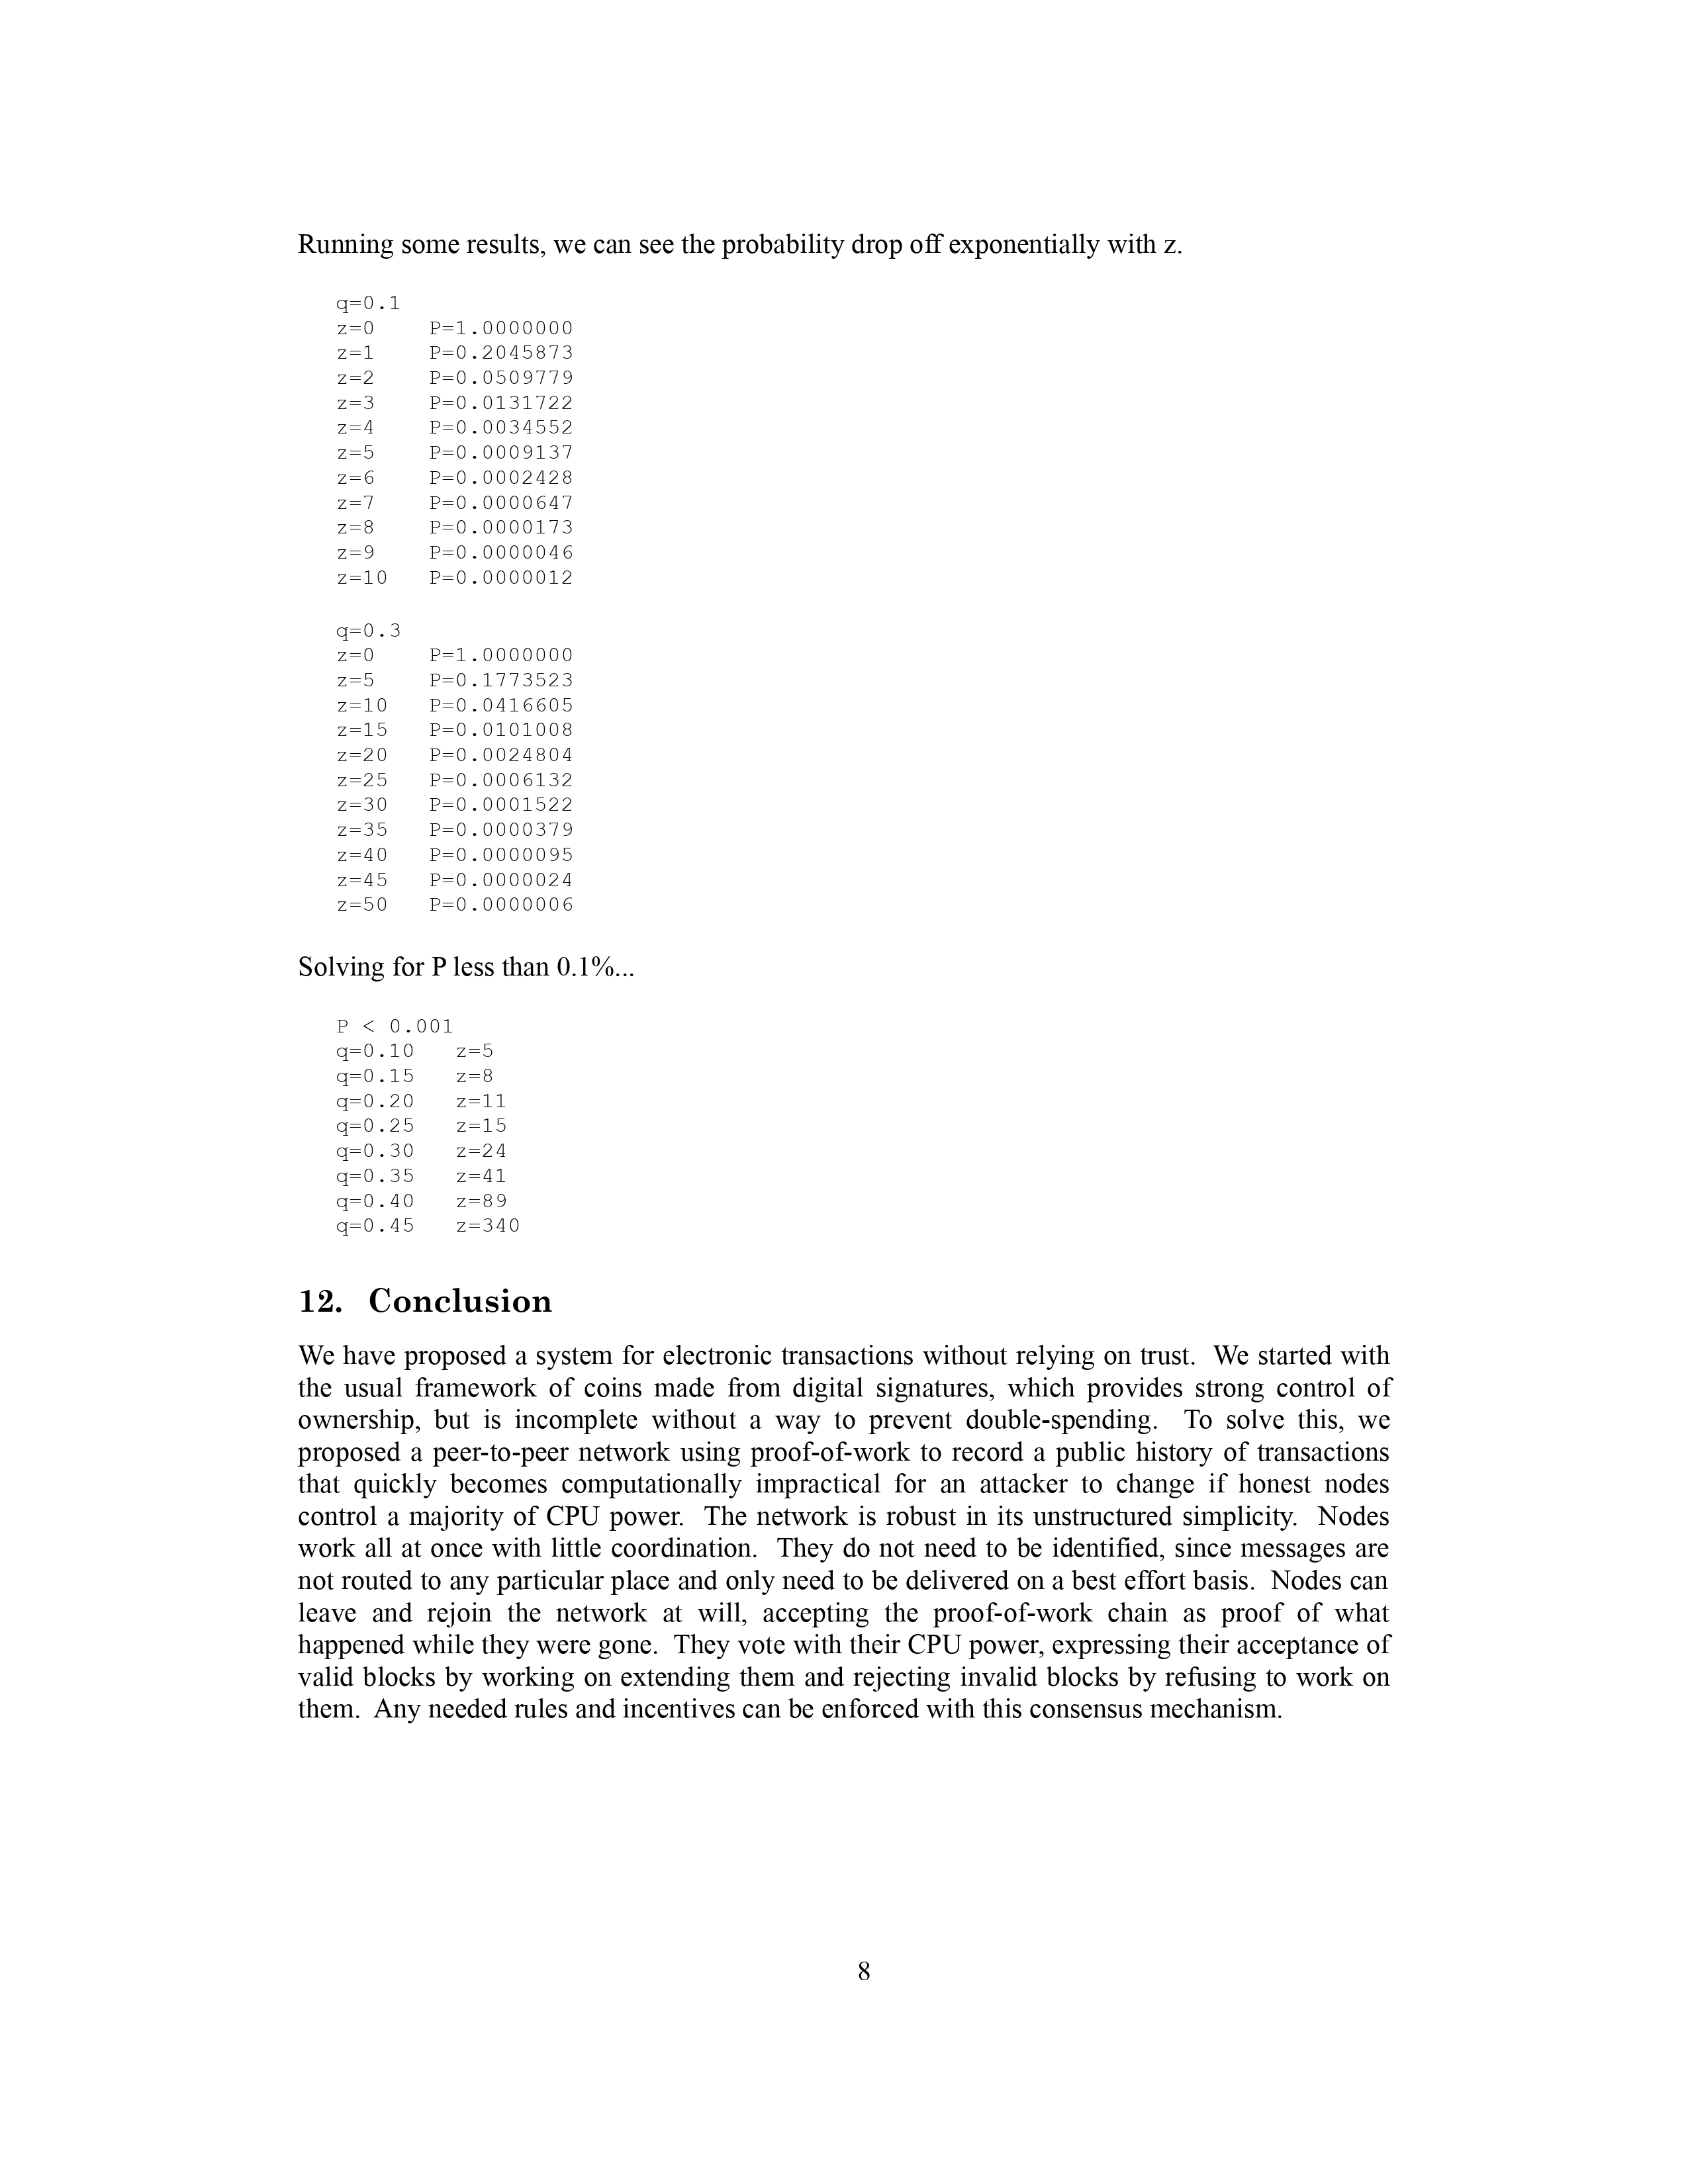 Bitcoin Whitepaper Page 8